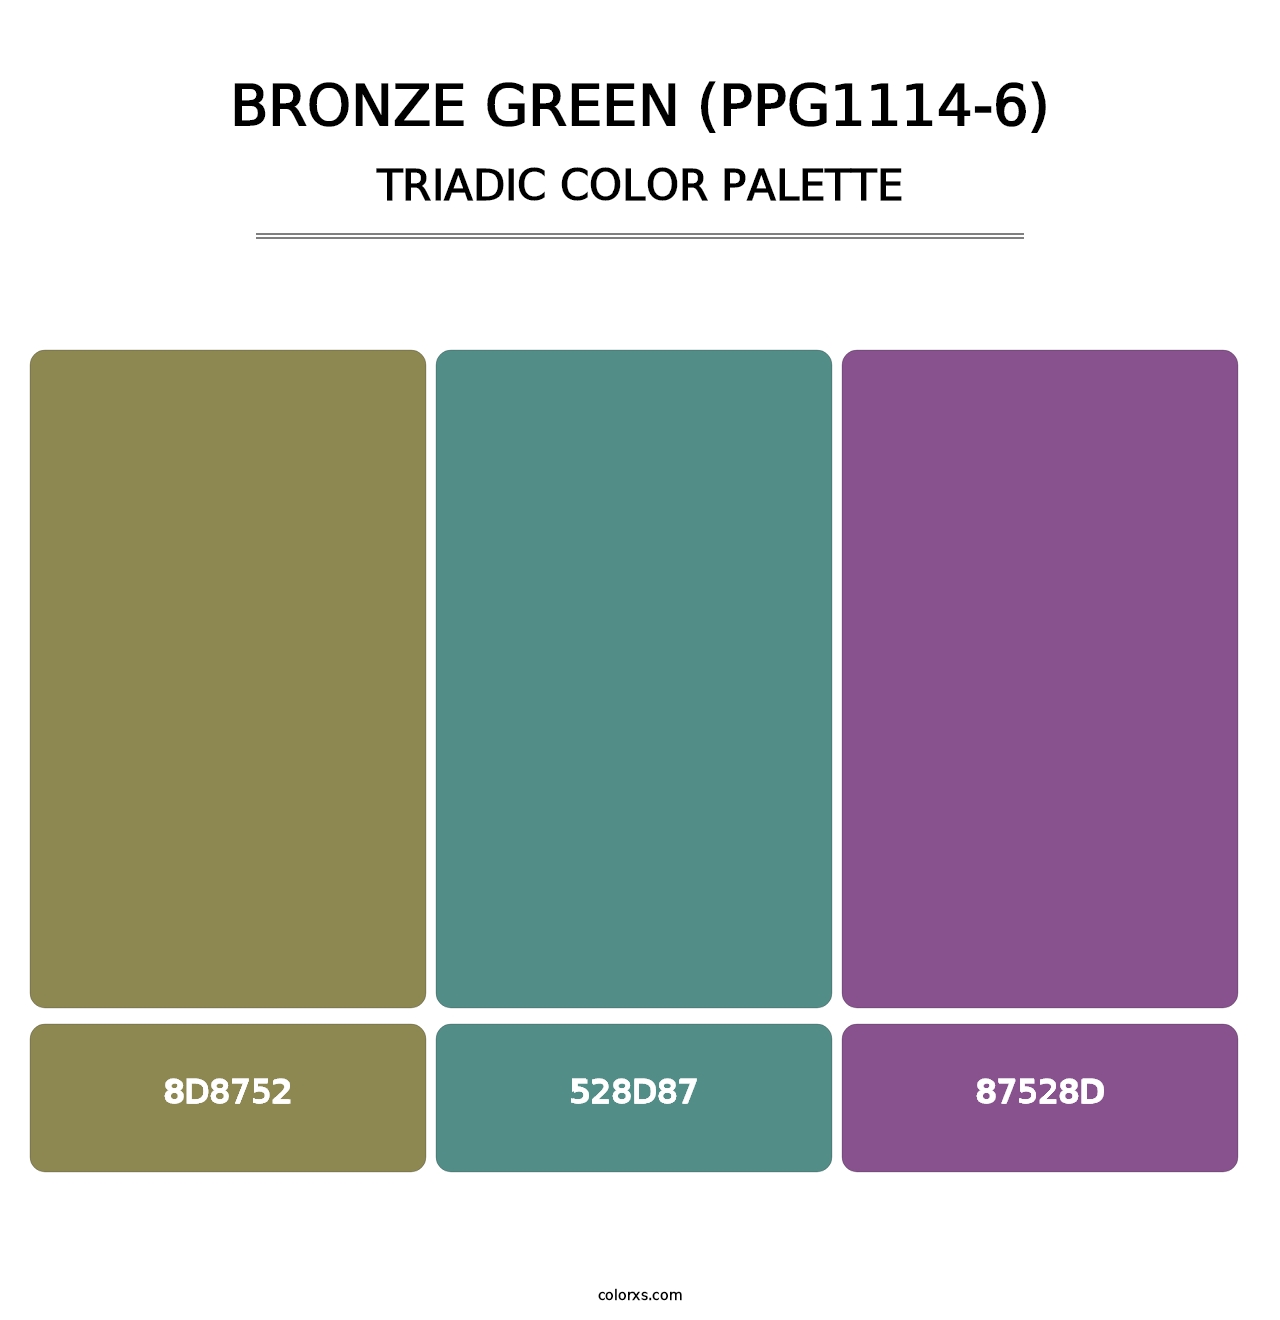 Bronze Green (PPG1114-6) - Triadic Color Palette